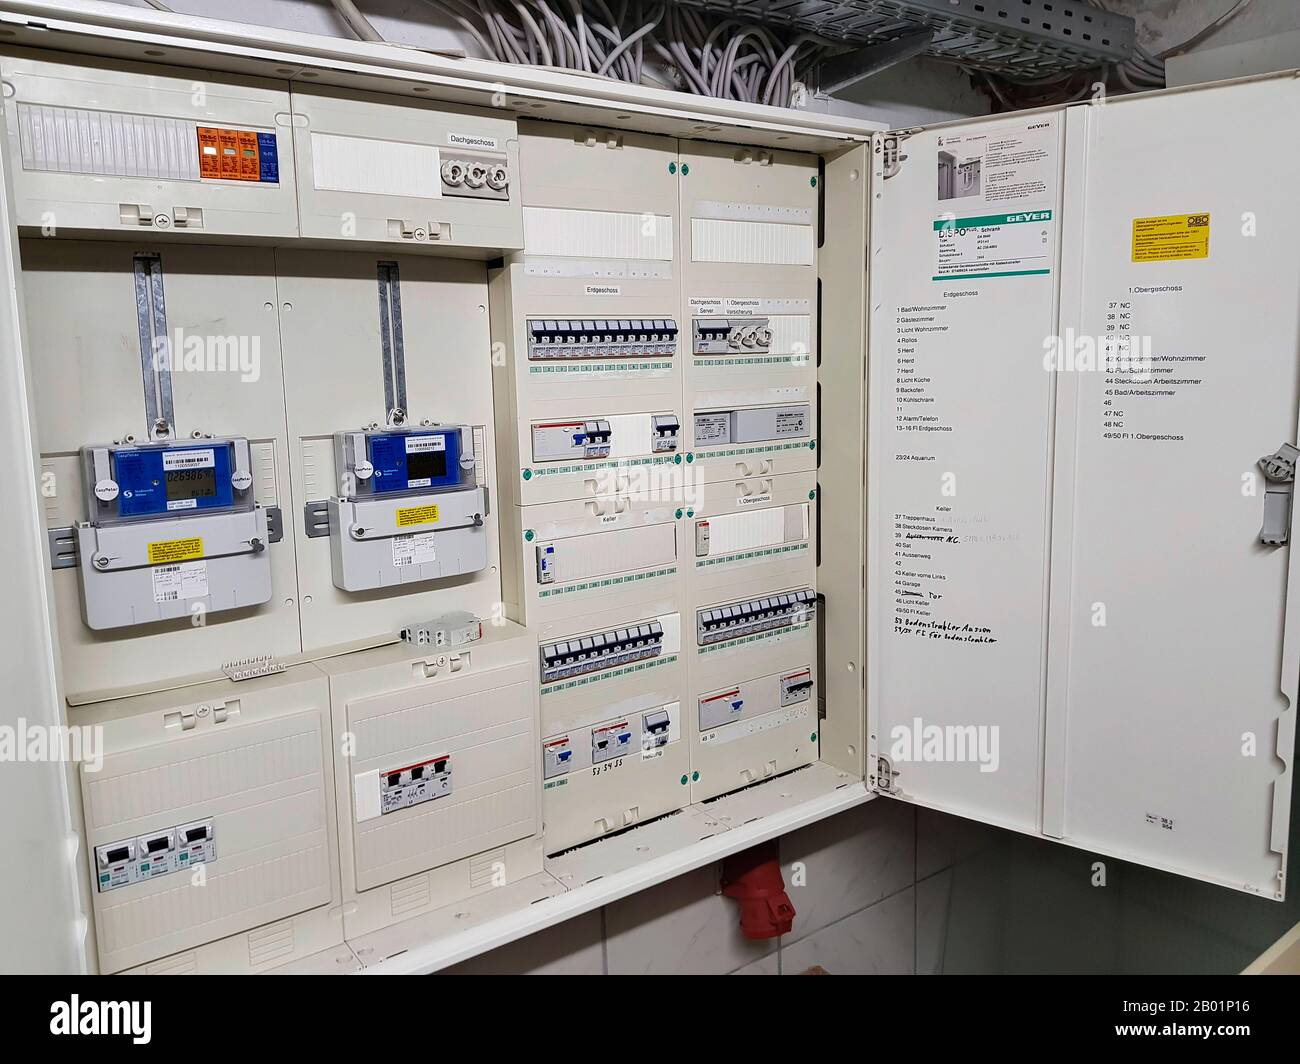 electricity supply systems in a cellar, Germany Stock Photo